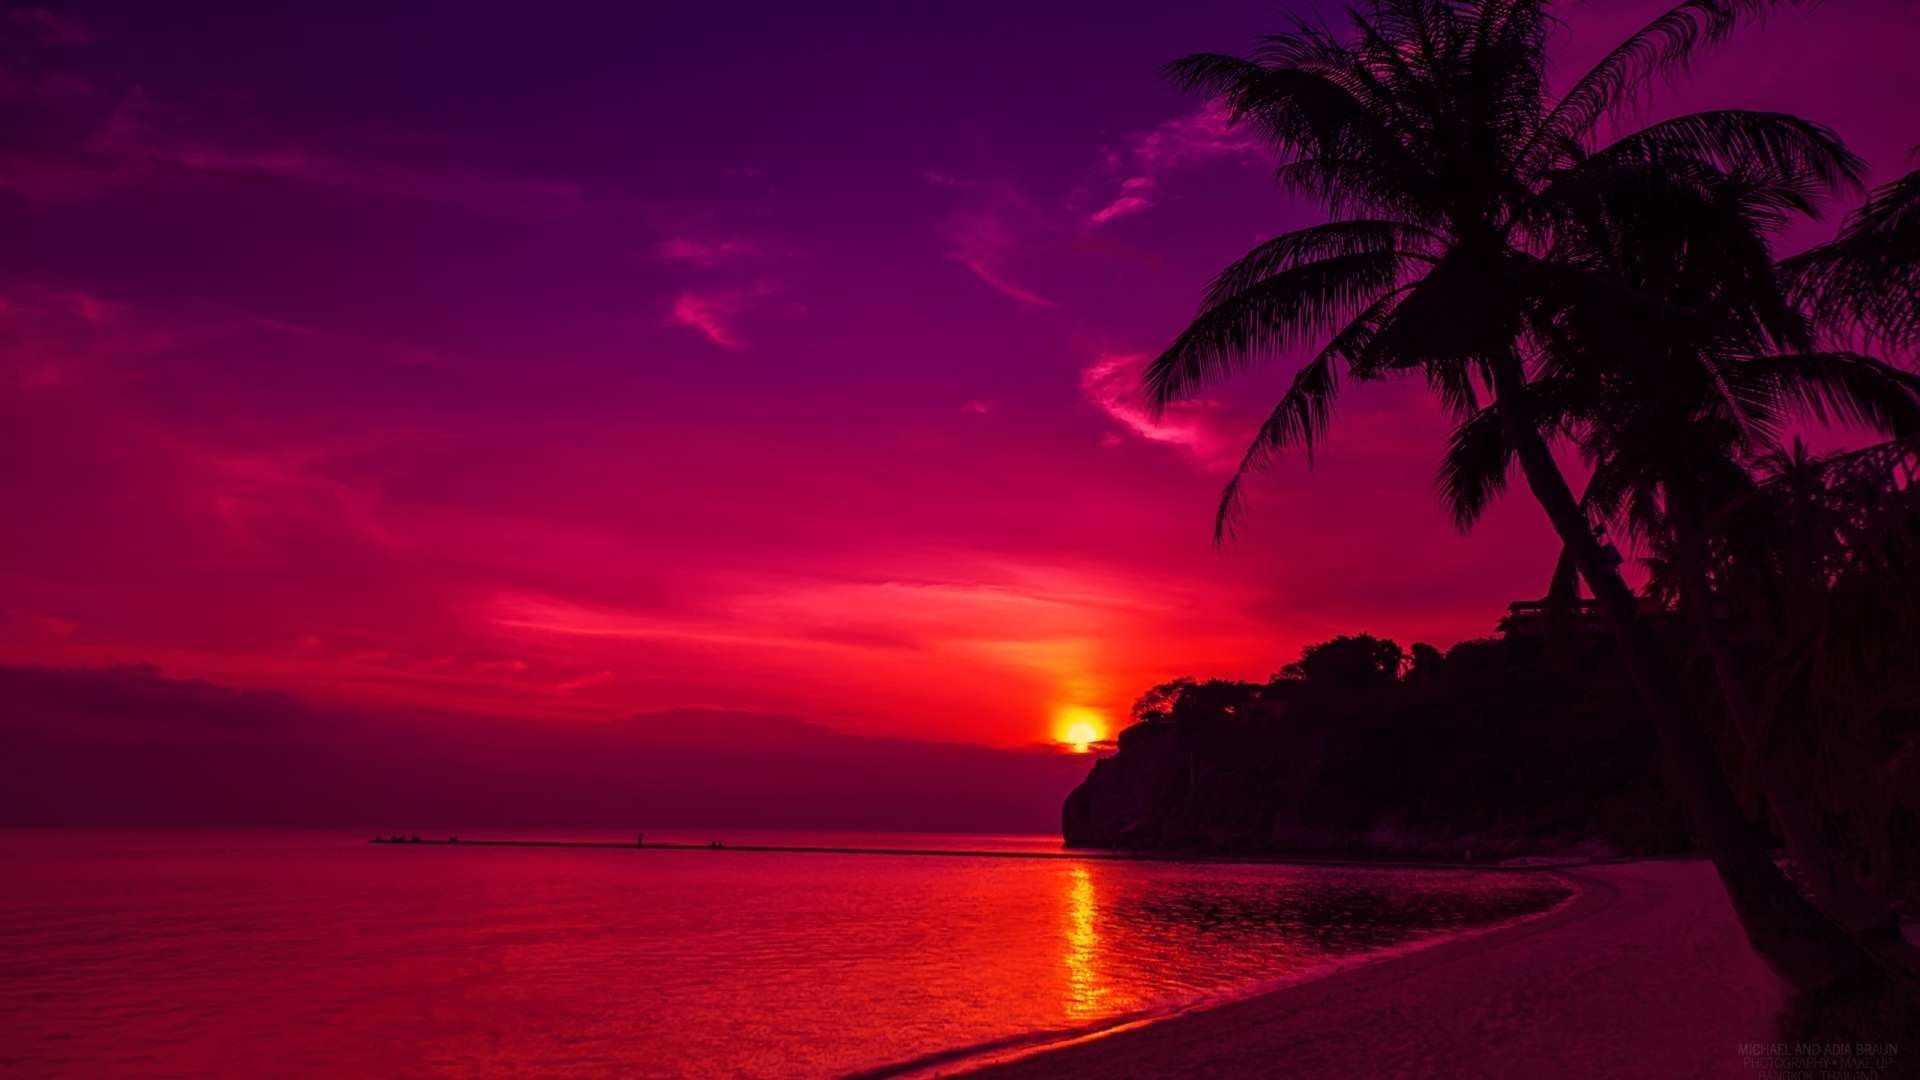 Wallpapers For > Hd Beach Sunset Wallpapers 1080p